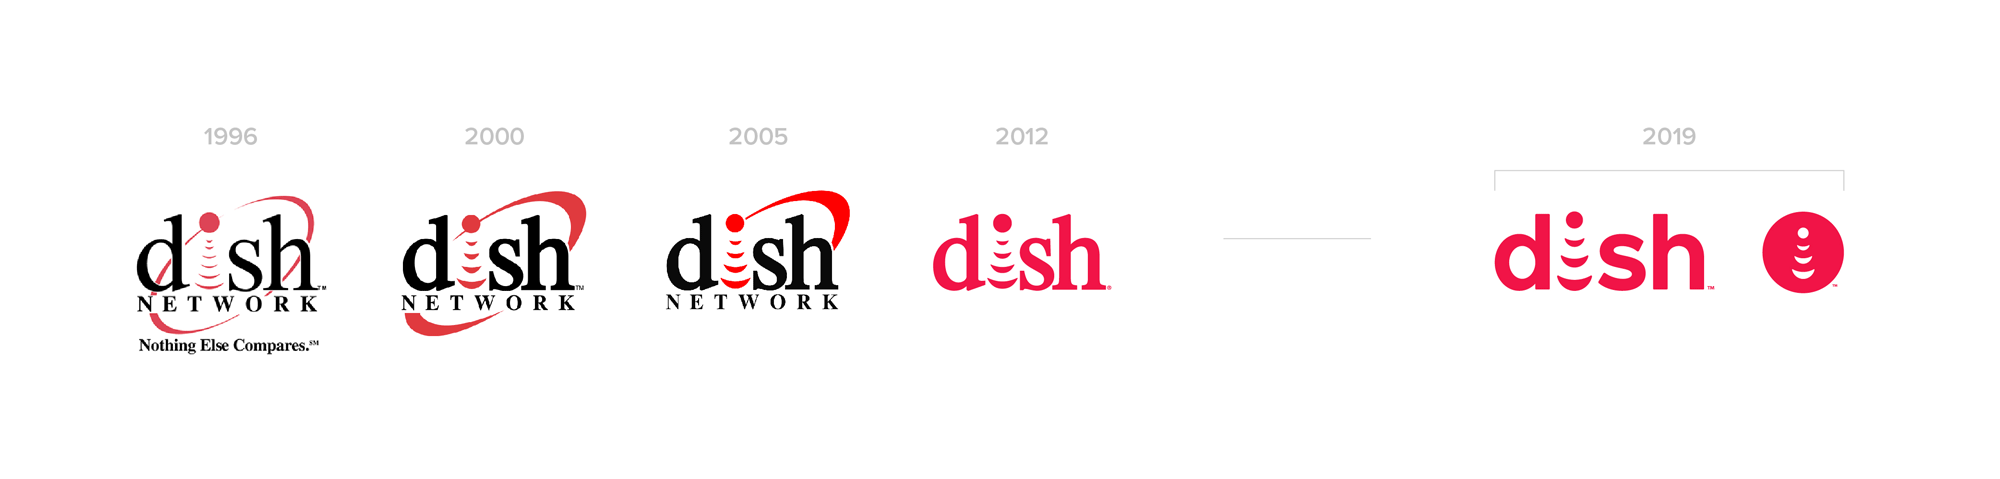 Dish Logo - Brand New: Follow Up: New Logo And Identity For DISH Done In House